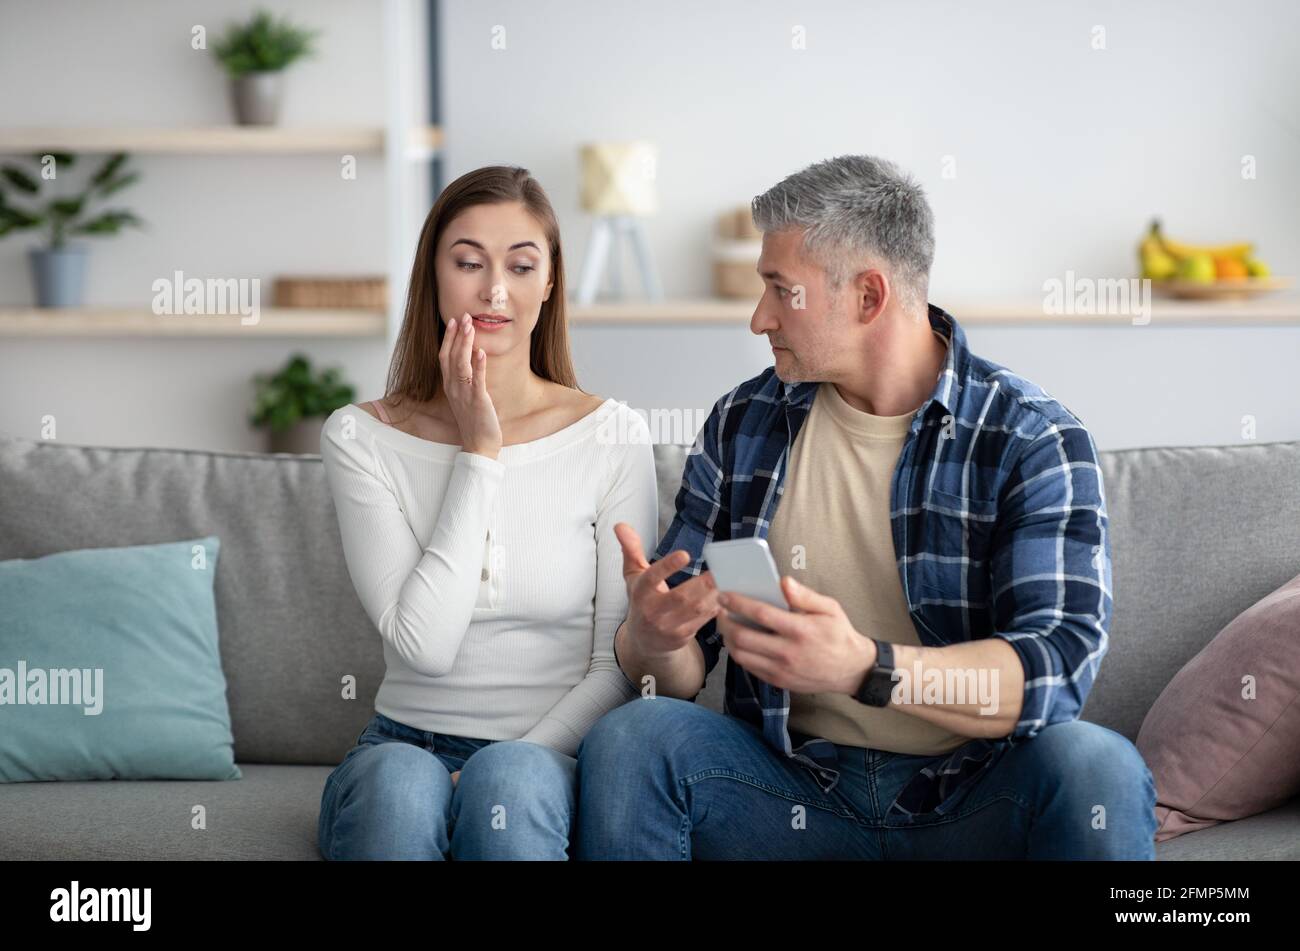 Mature man finding out about his wife's affair, confronting her about photos with lover on mobile phone Stock Photo